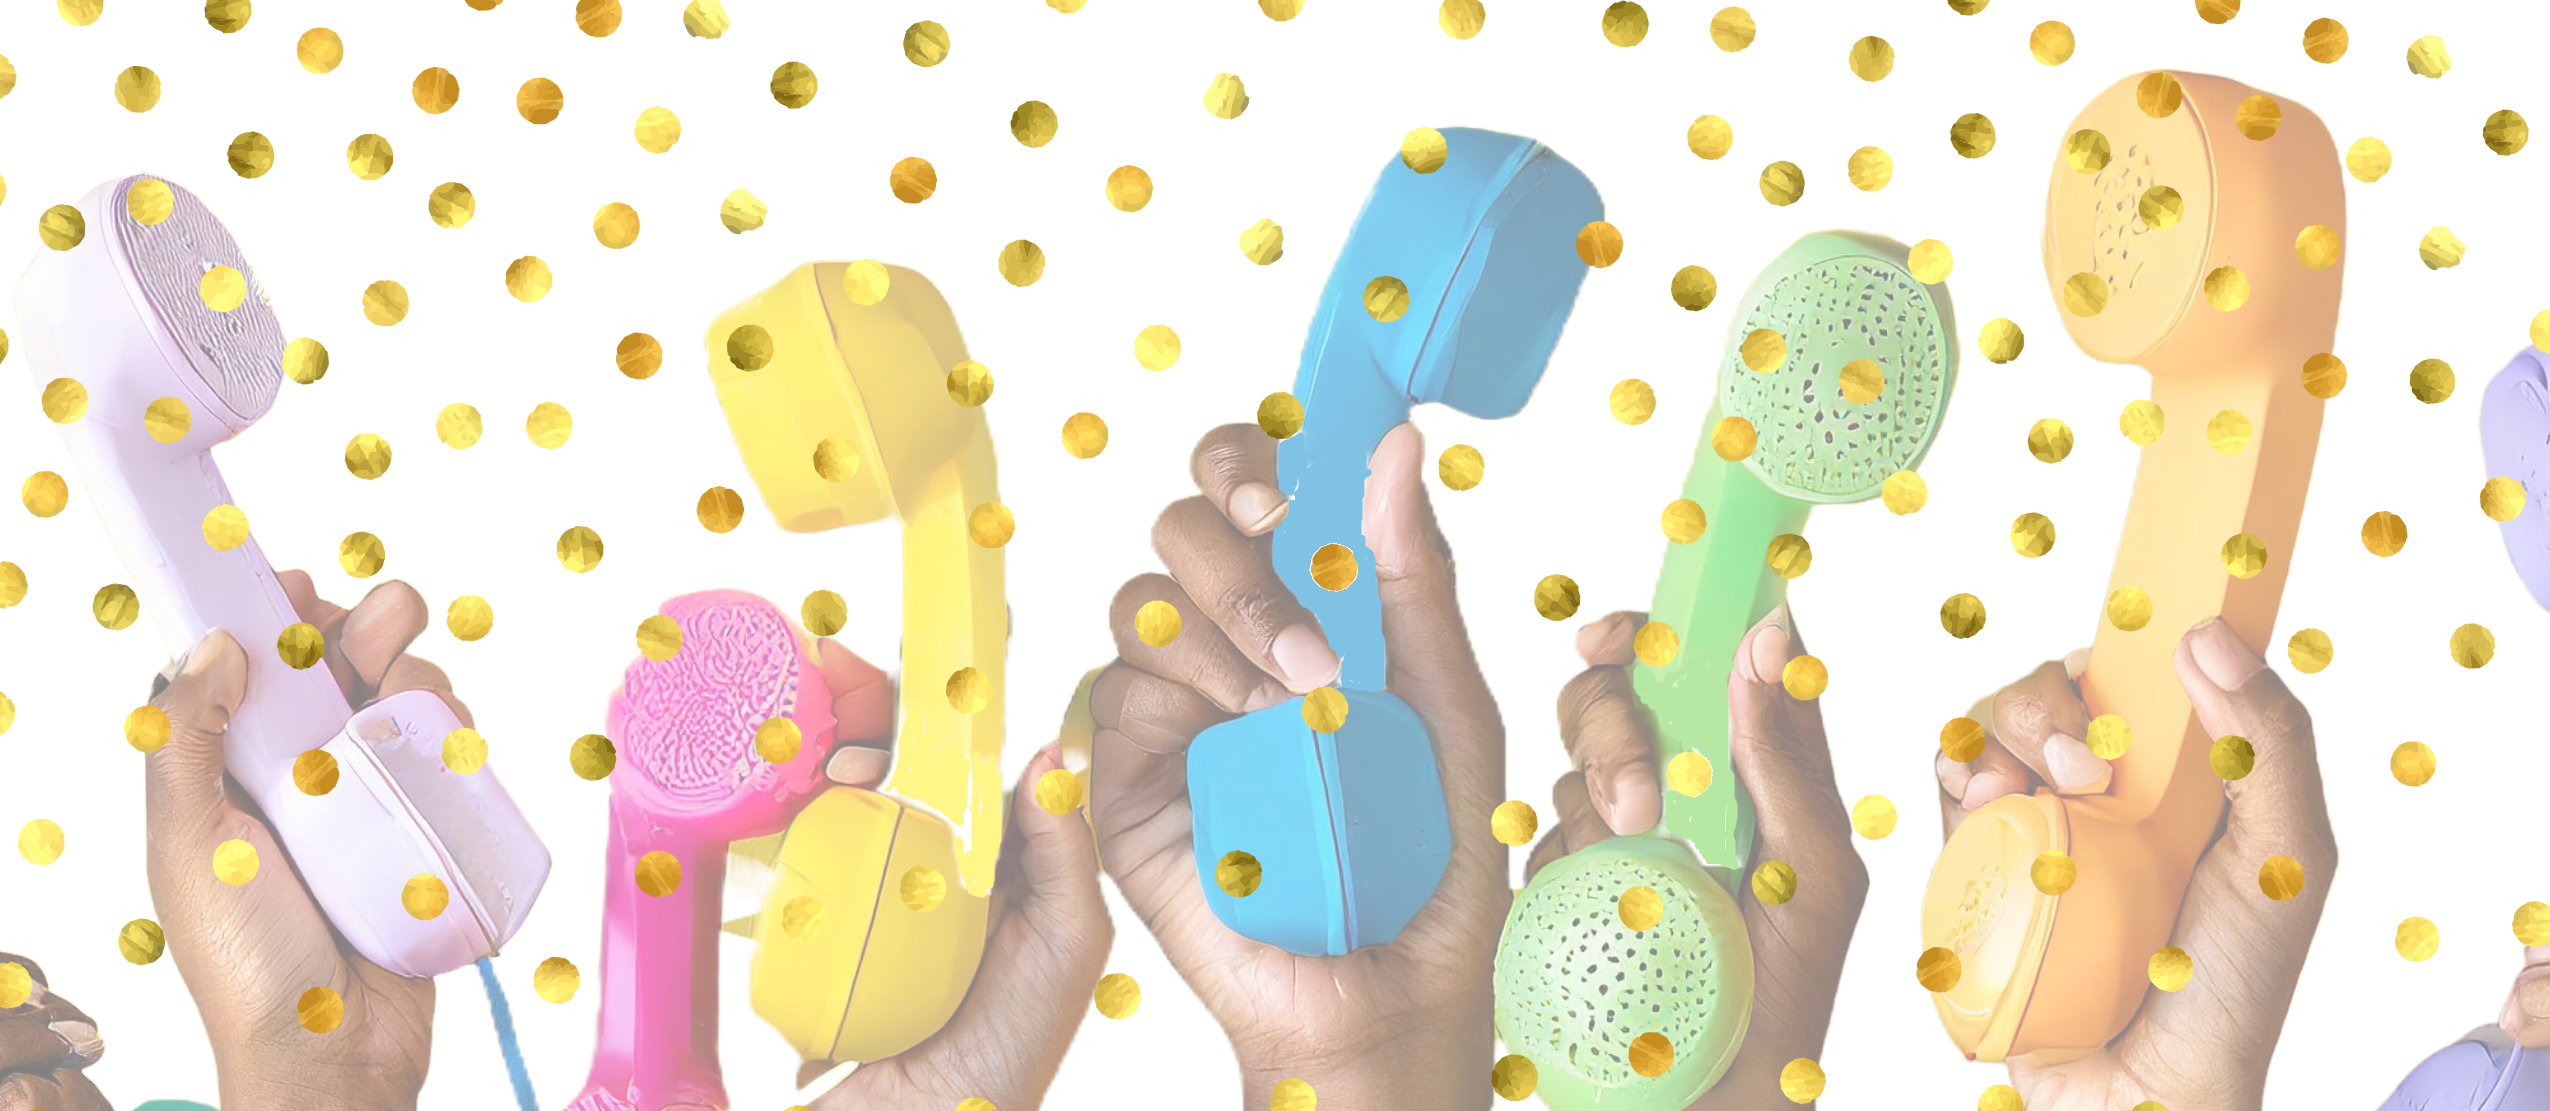 a row of hands holding old-style telephone handsets in various bright colors with gold confetti overlay